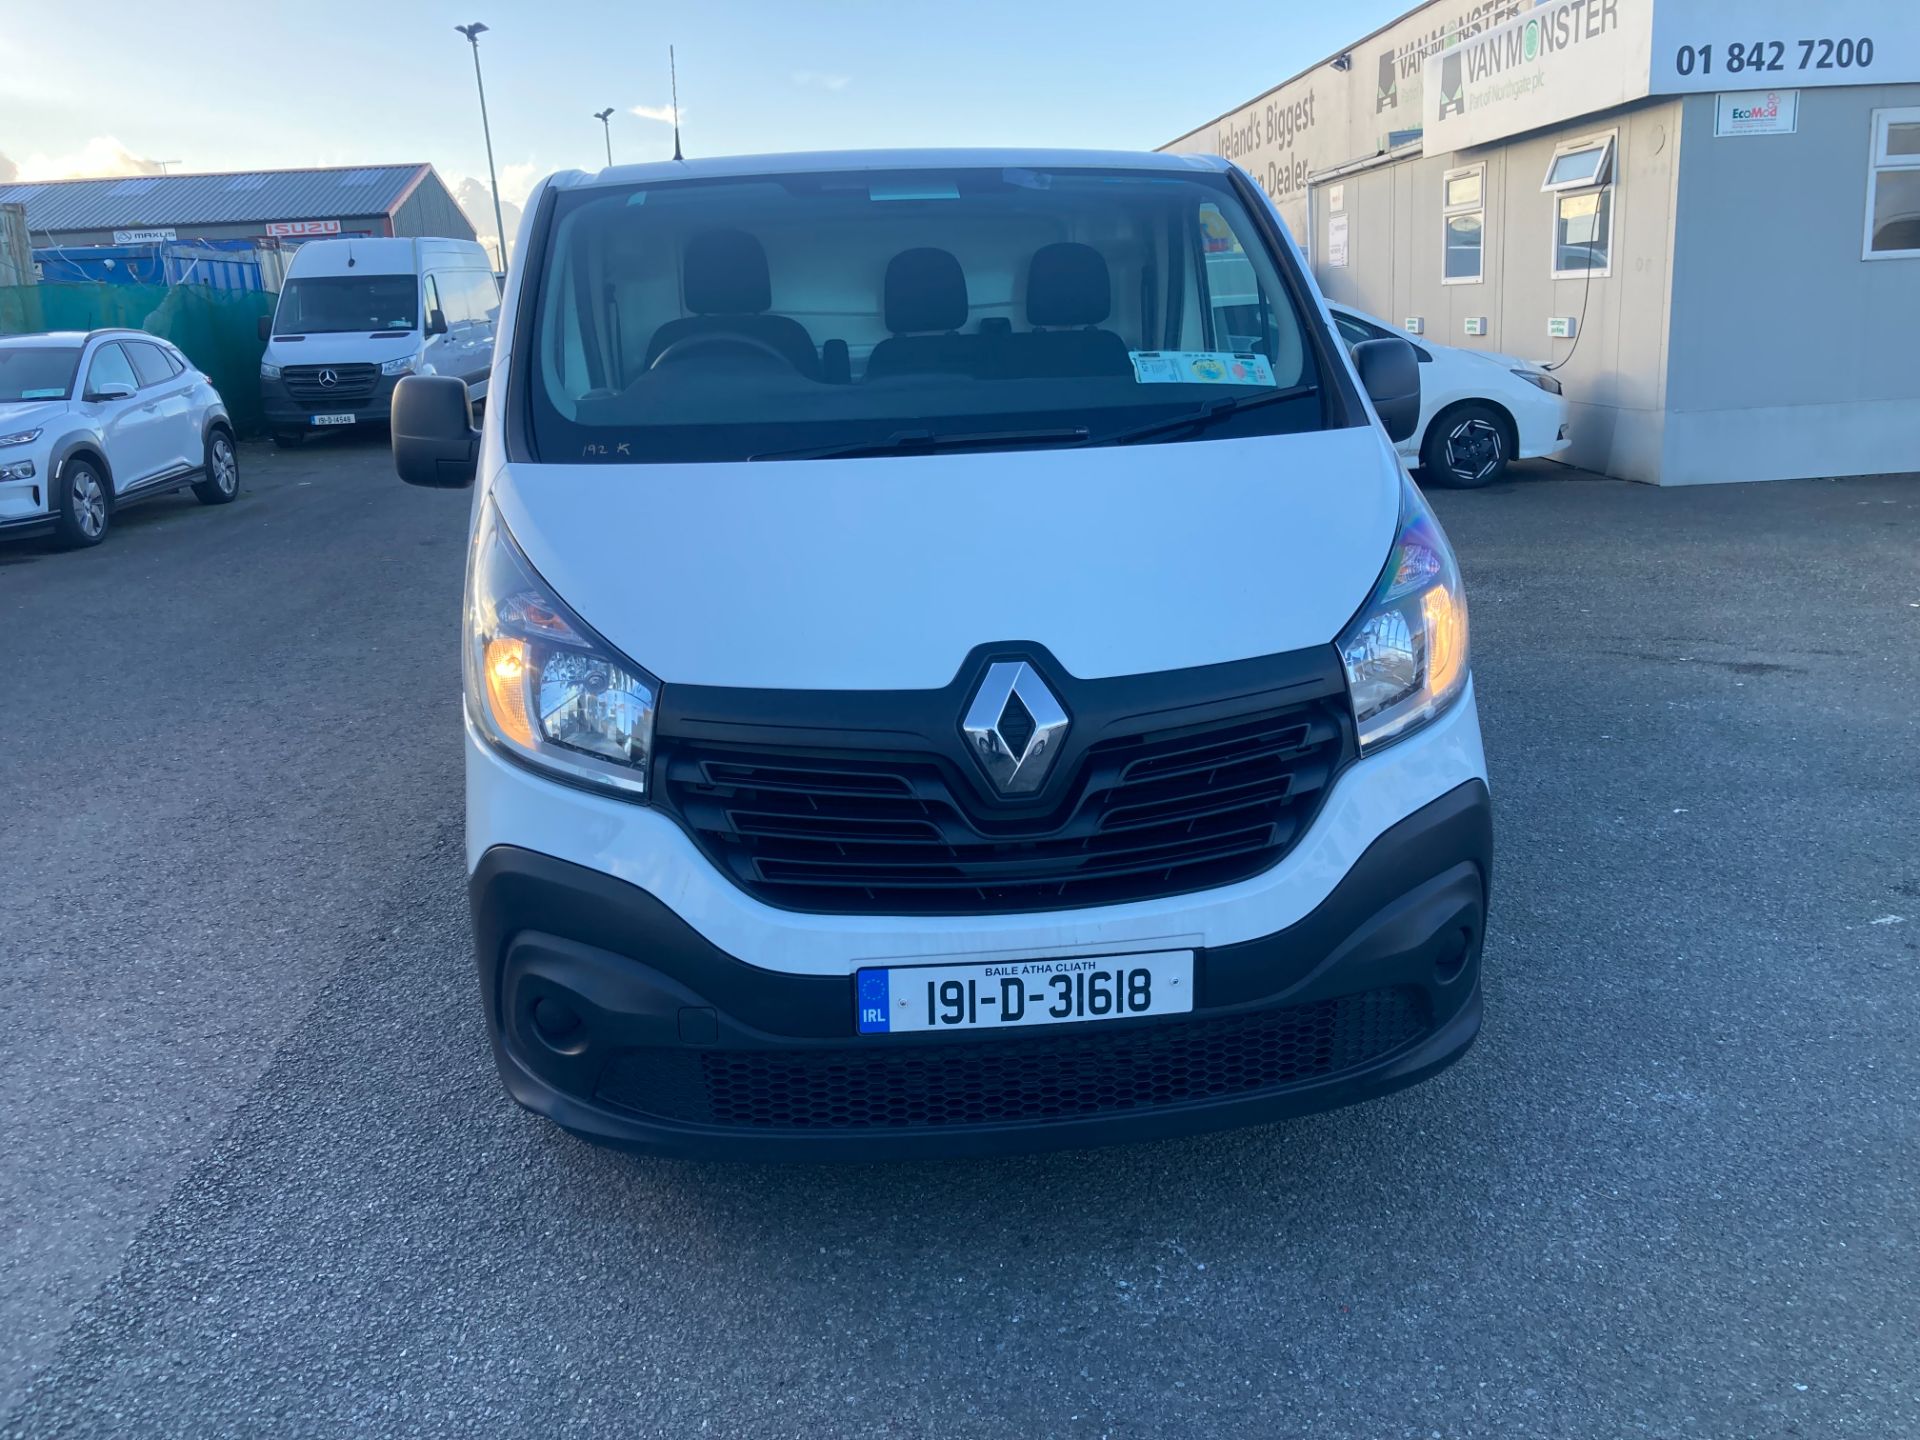 2019 Renault Trafic LL29 DCI 120 Business (191D31618) Thumbnail 2